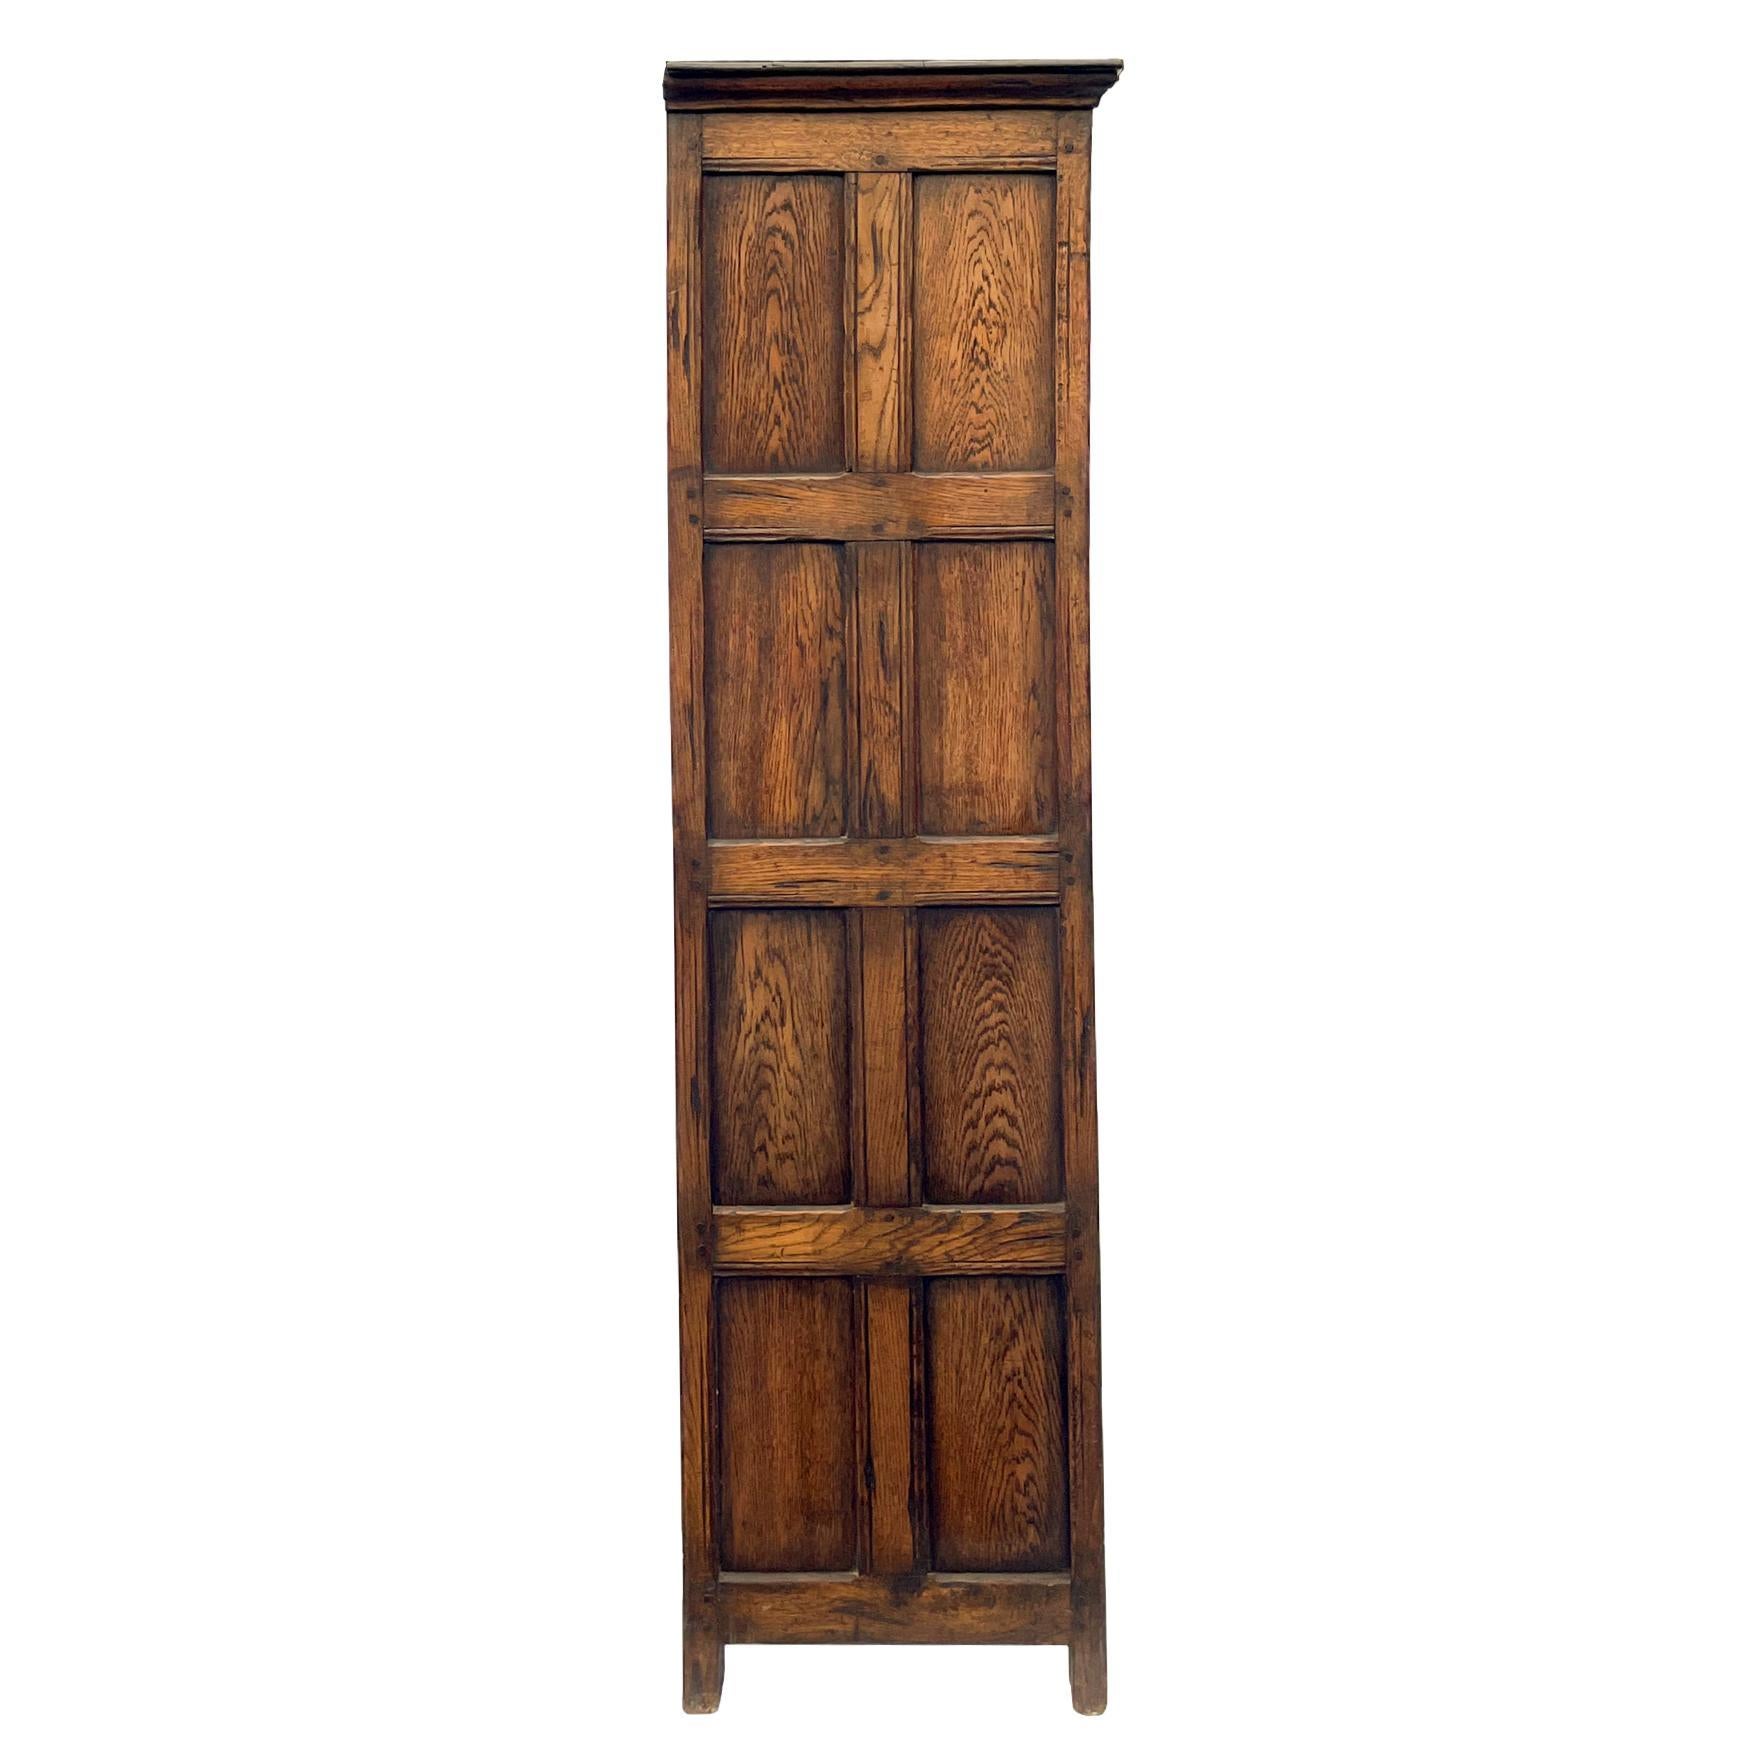 A solid Oak Jacobean-Style wardrobe, the doors with relief carved linenfold panels and raised panel sides, with hand forged iron hardware, pegged construction, English, circa 1900.